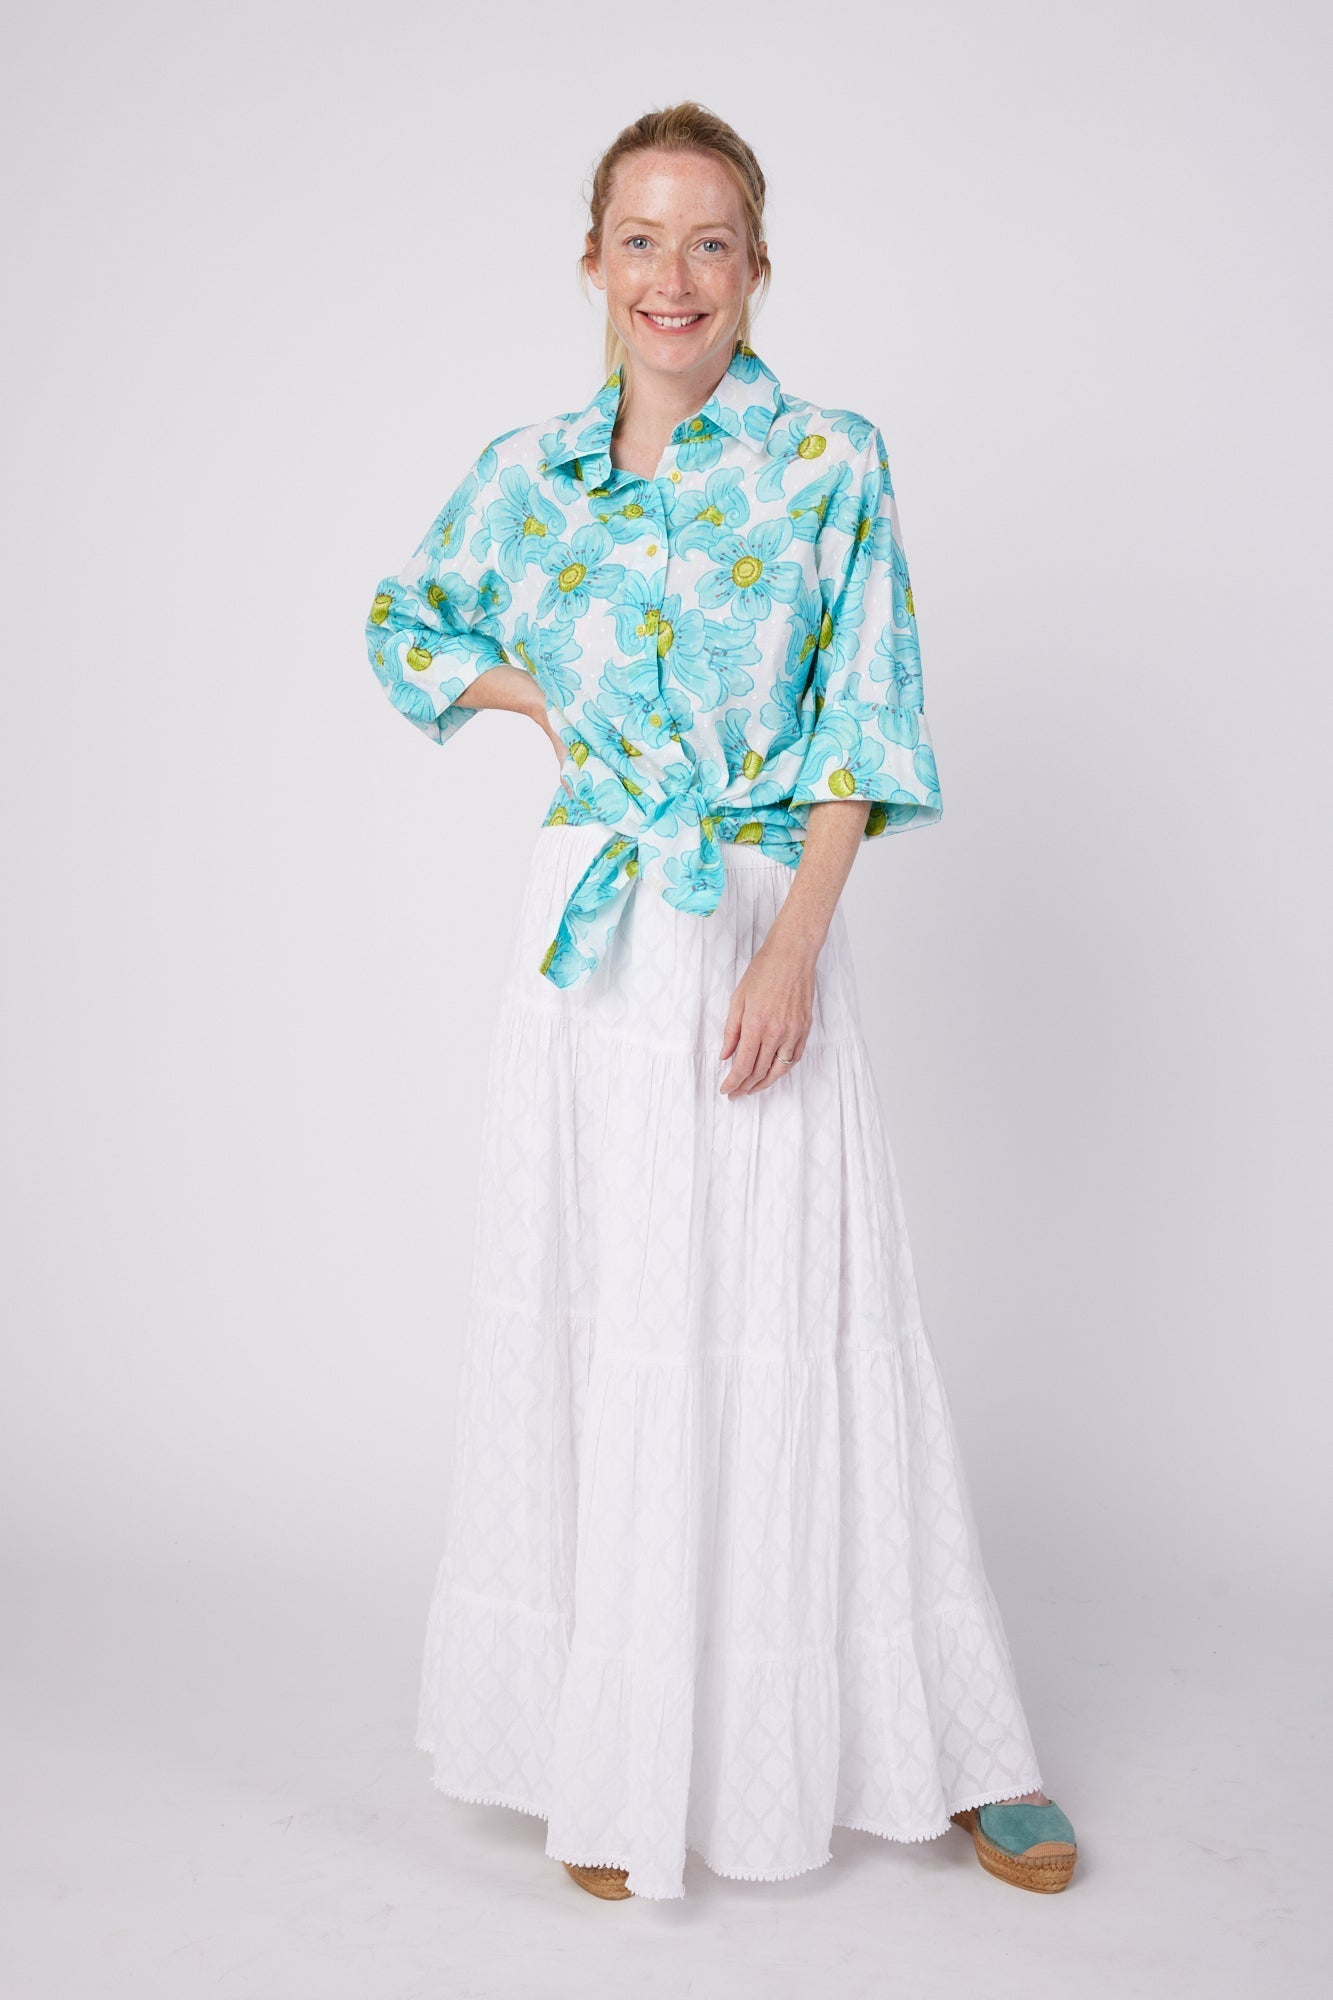 ModaPosa Rosalia 3/4 Sleeve Shirt with Collar in Blue Floral . Discover women's resort dresses and lifestyle clothing inspired by the Mediterranean. Free worldwide shipping available!